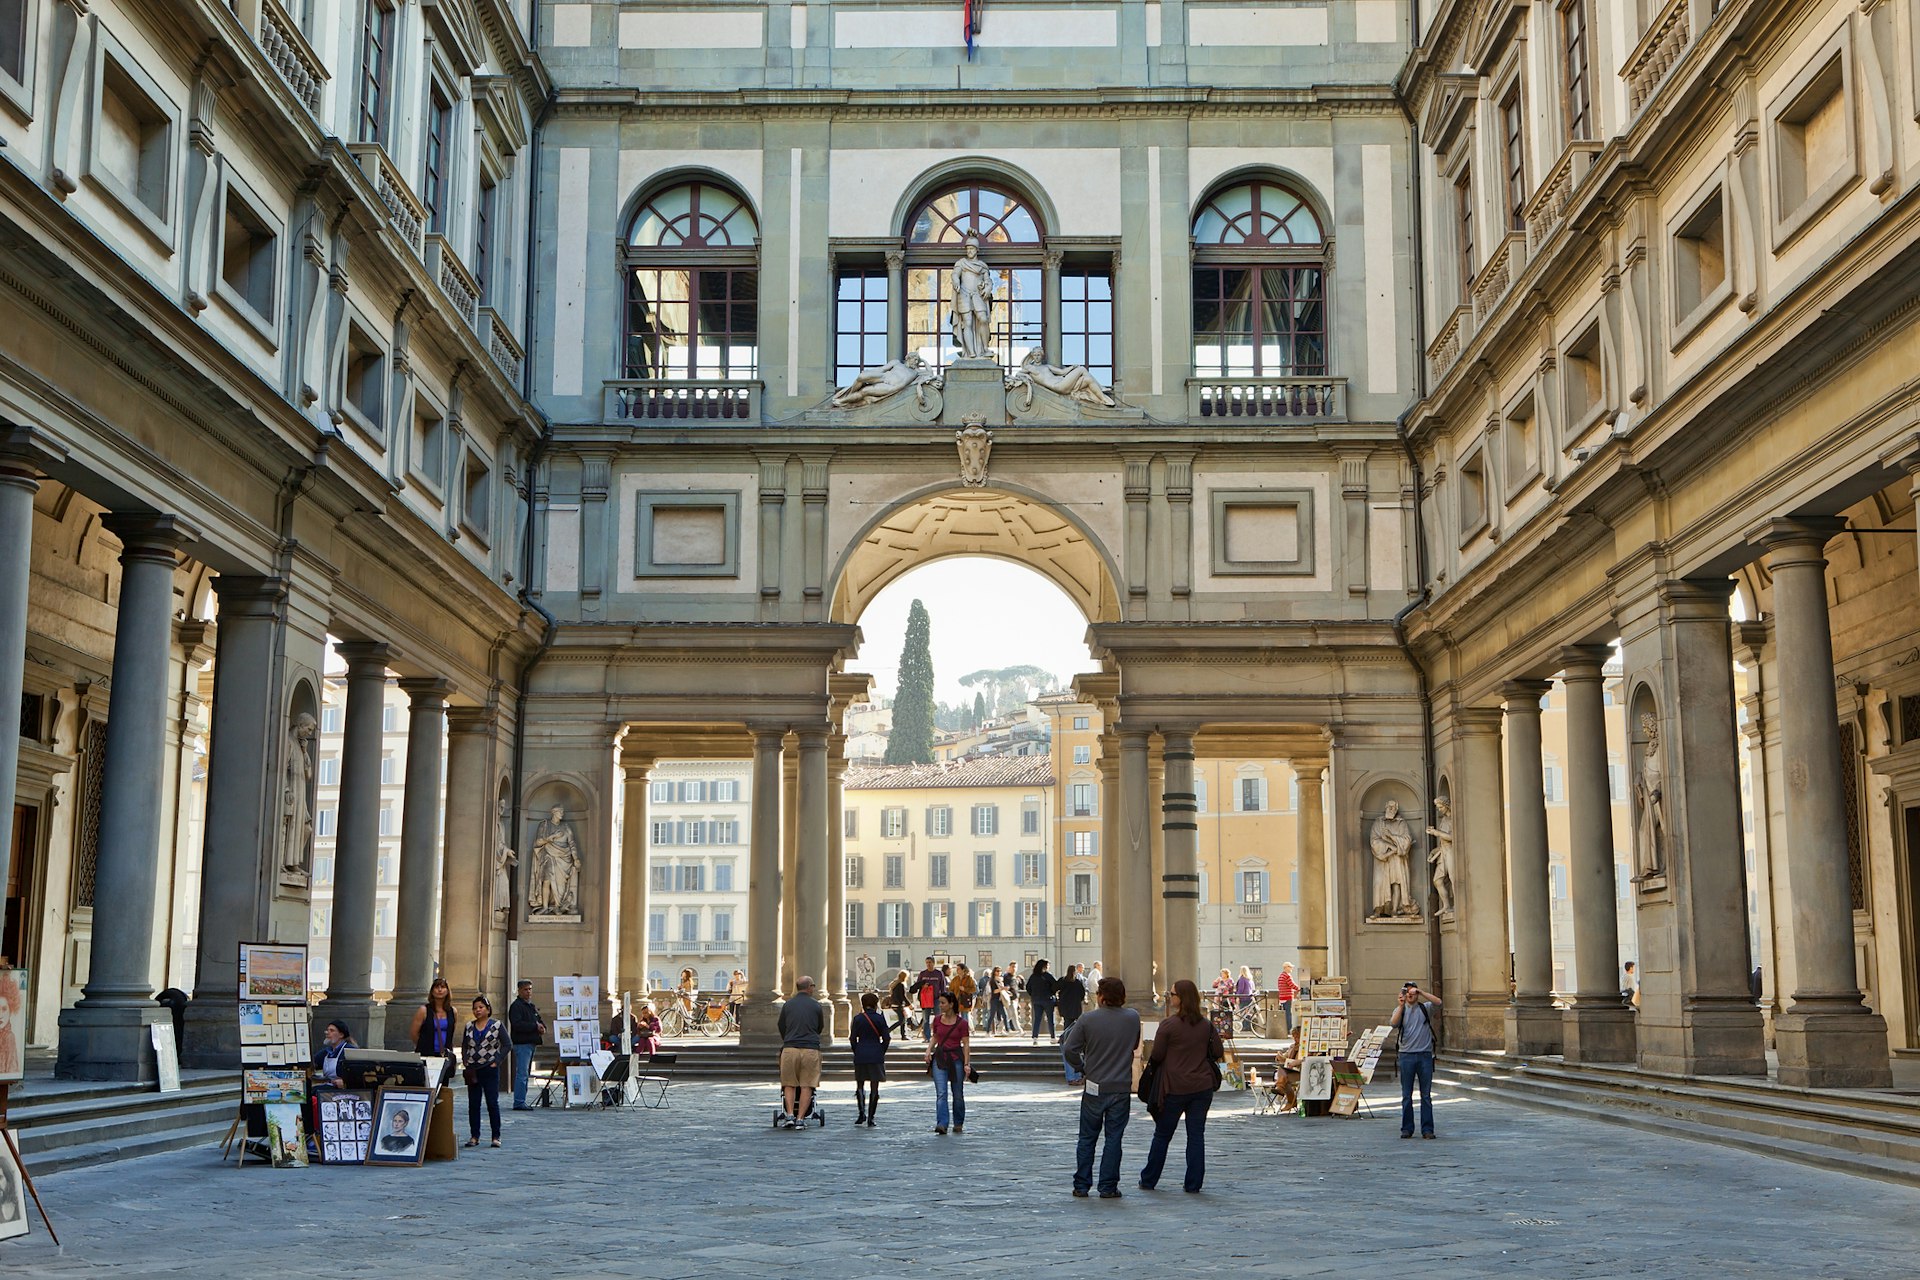 The sun-drenched courtyard outside the entrance to the Galleria degli Uffizi